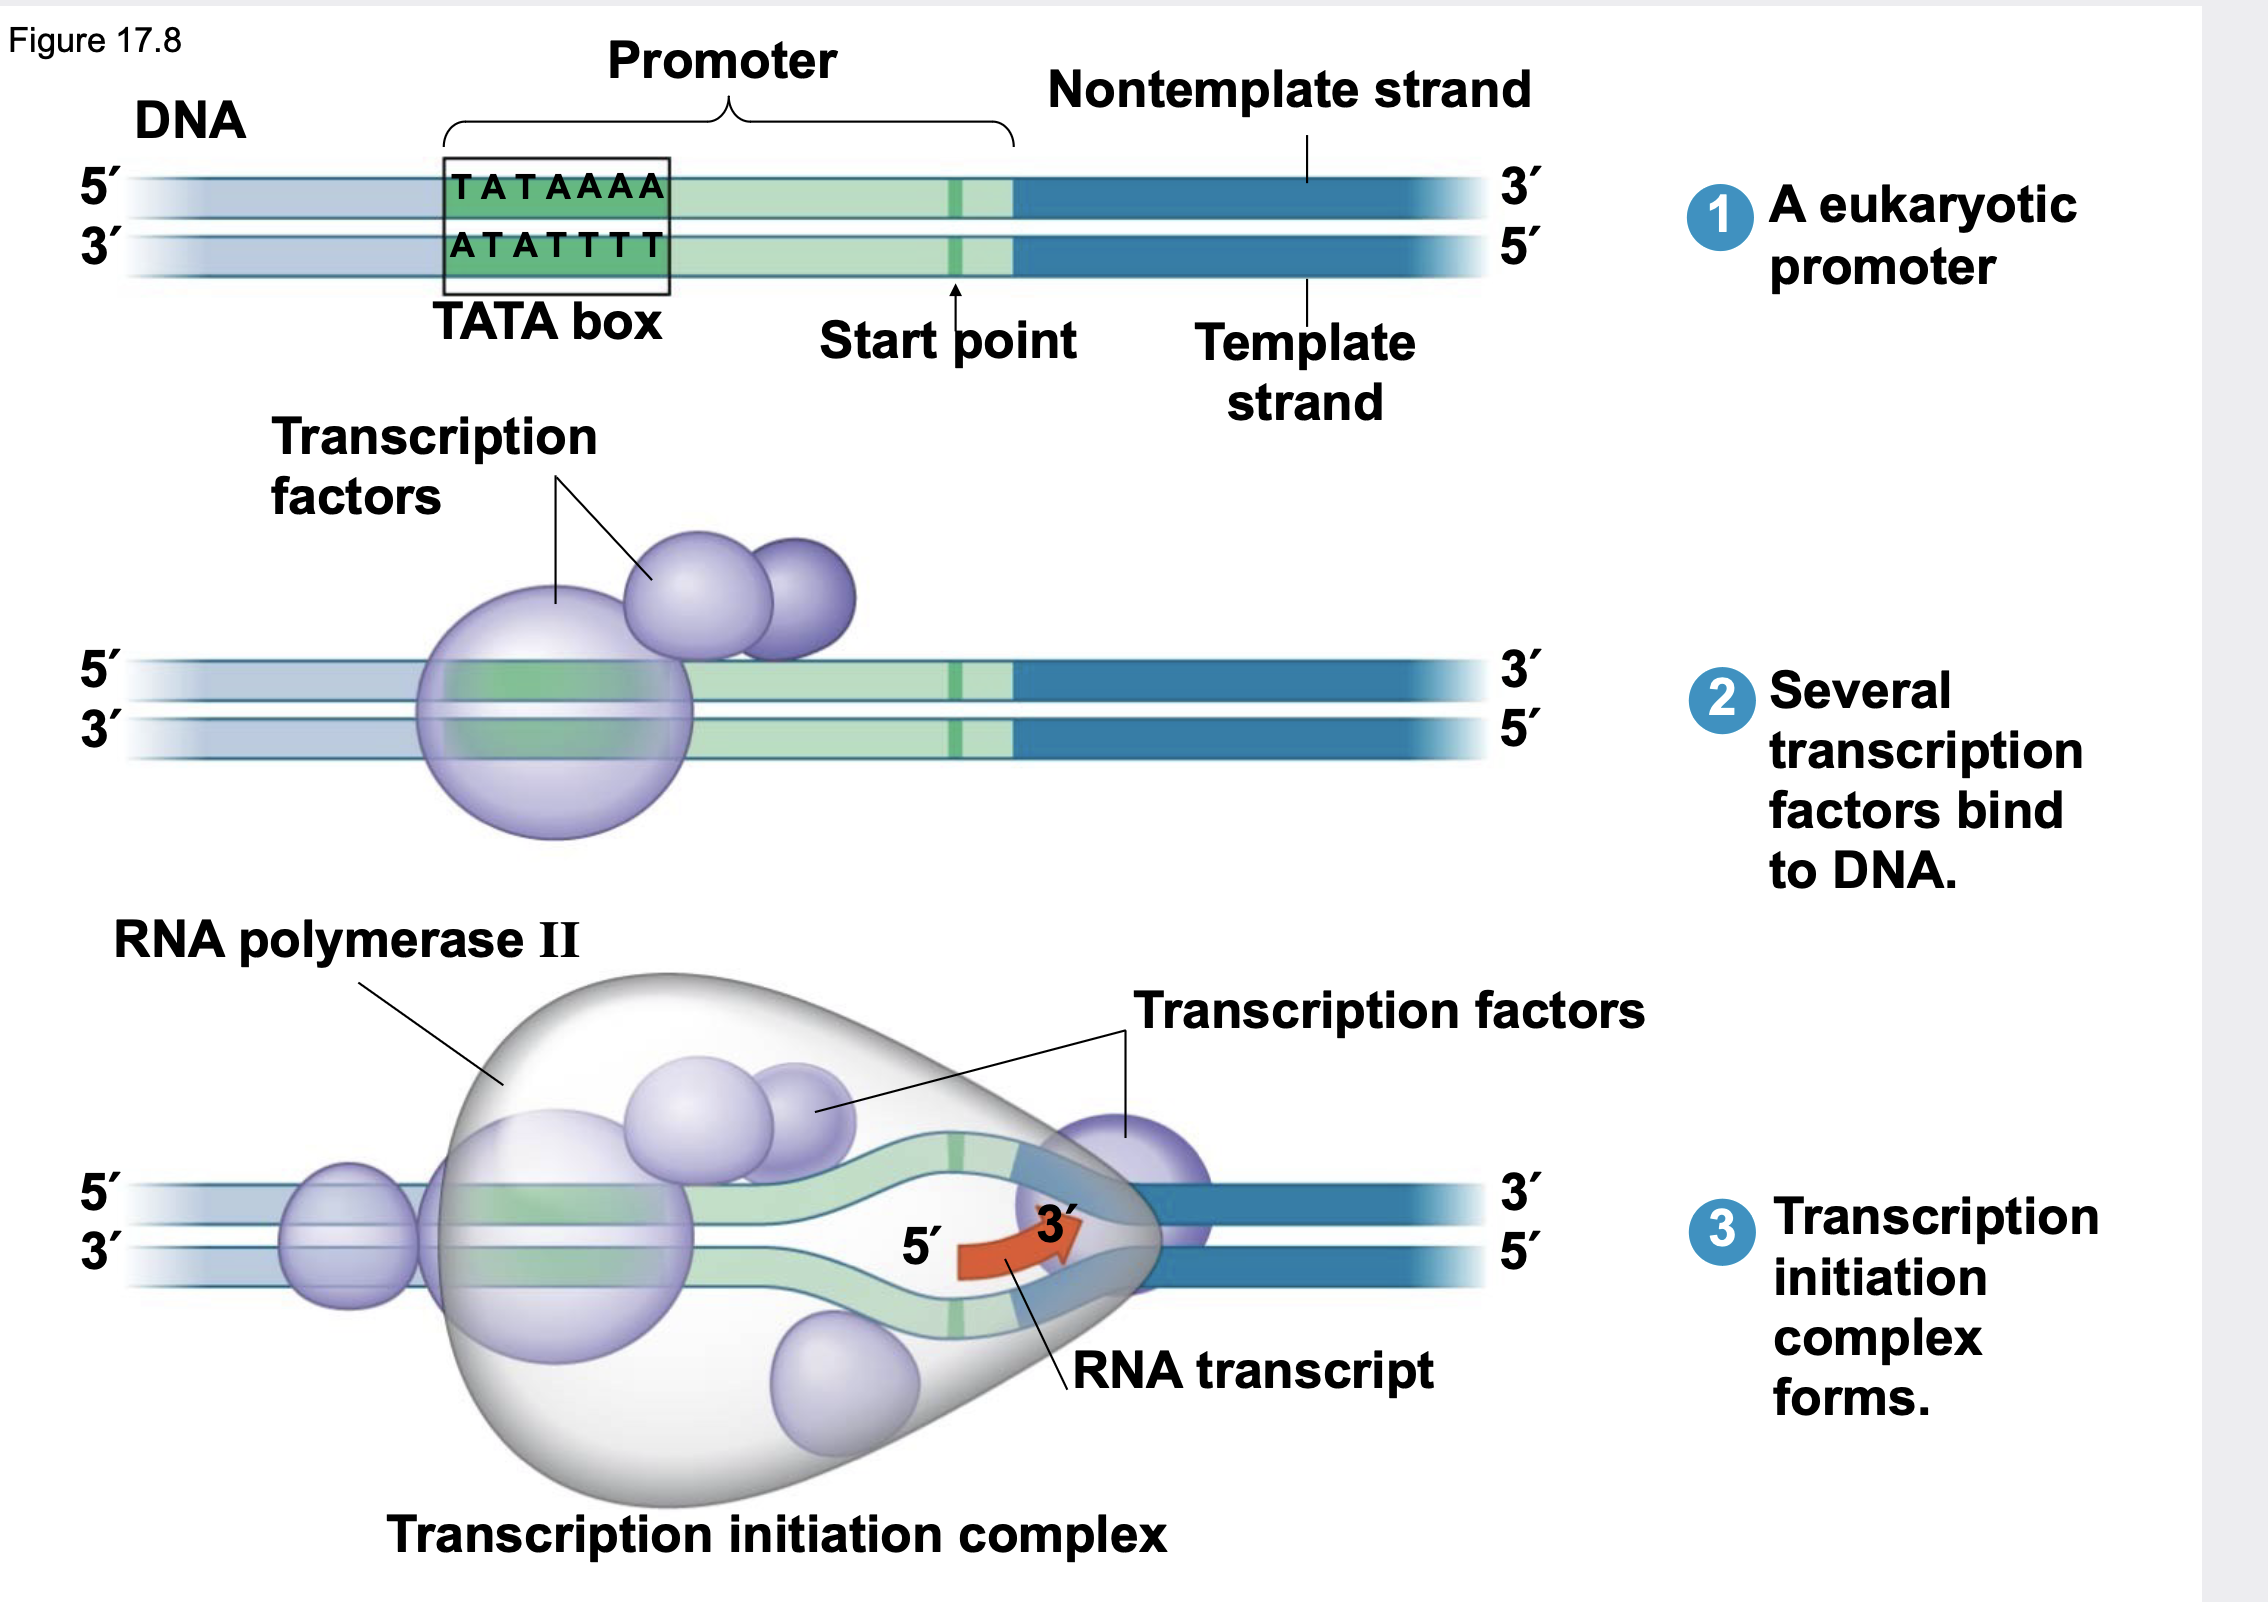 <p>.Promoters mark the transcriptional start point and usually extend several dozen nucleotide pairs upstream of the start point.</p><p>.Transcription factors are proteins that bind to the promoter and are required for the binding of RNA polymerase and the initiation of transcription.</p><p>.The completed assembly of transcription factors and RNA polymerase II bound to a promoter is called a transcription initiation complex.</p><p>.A sequence in the promoter called a TATA box is crucial in forming the initiation complex in eukaryotes</p>